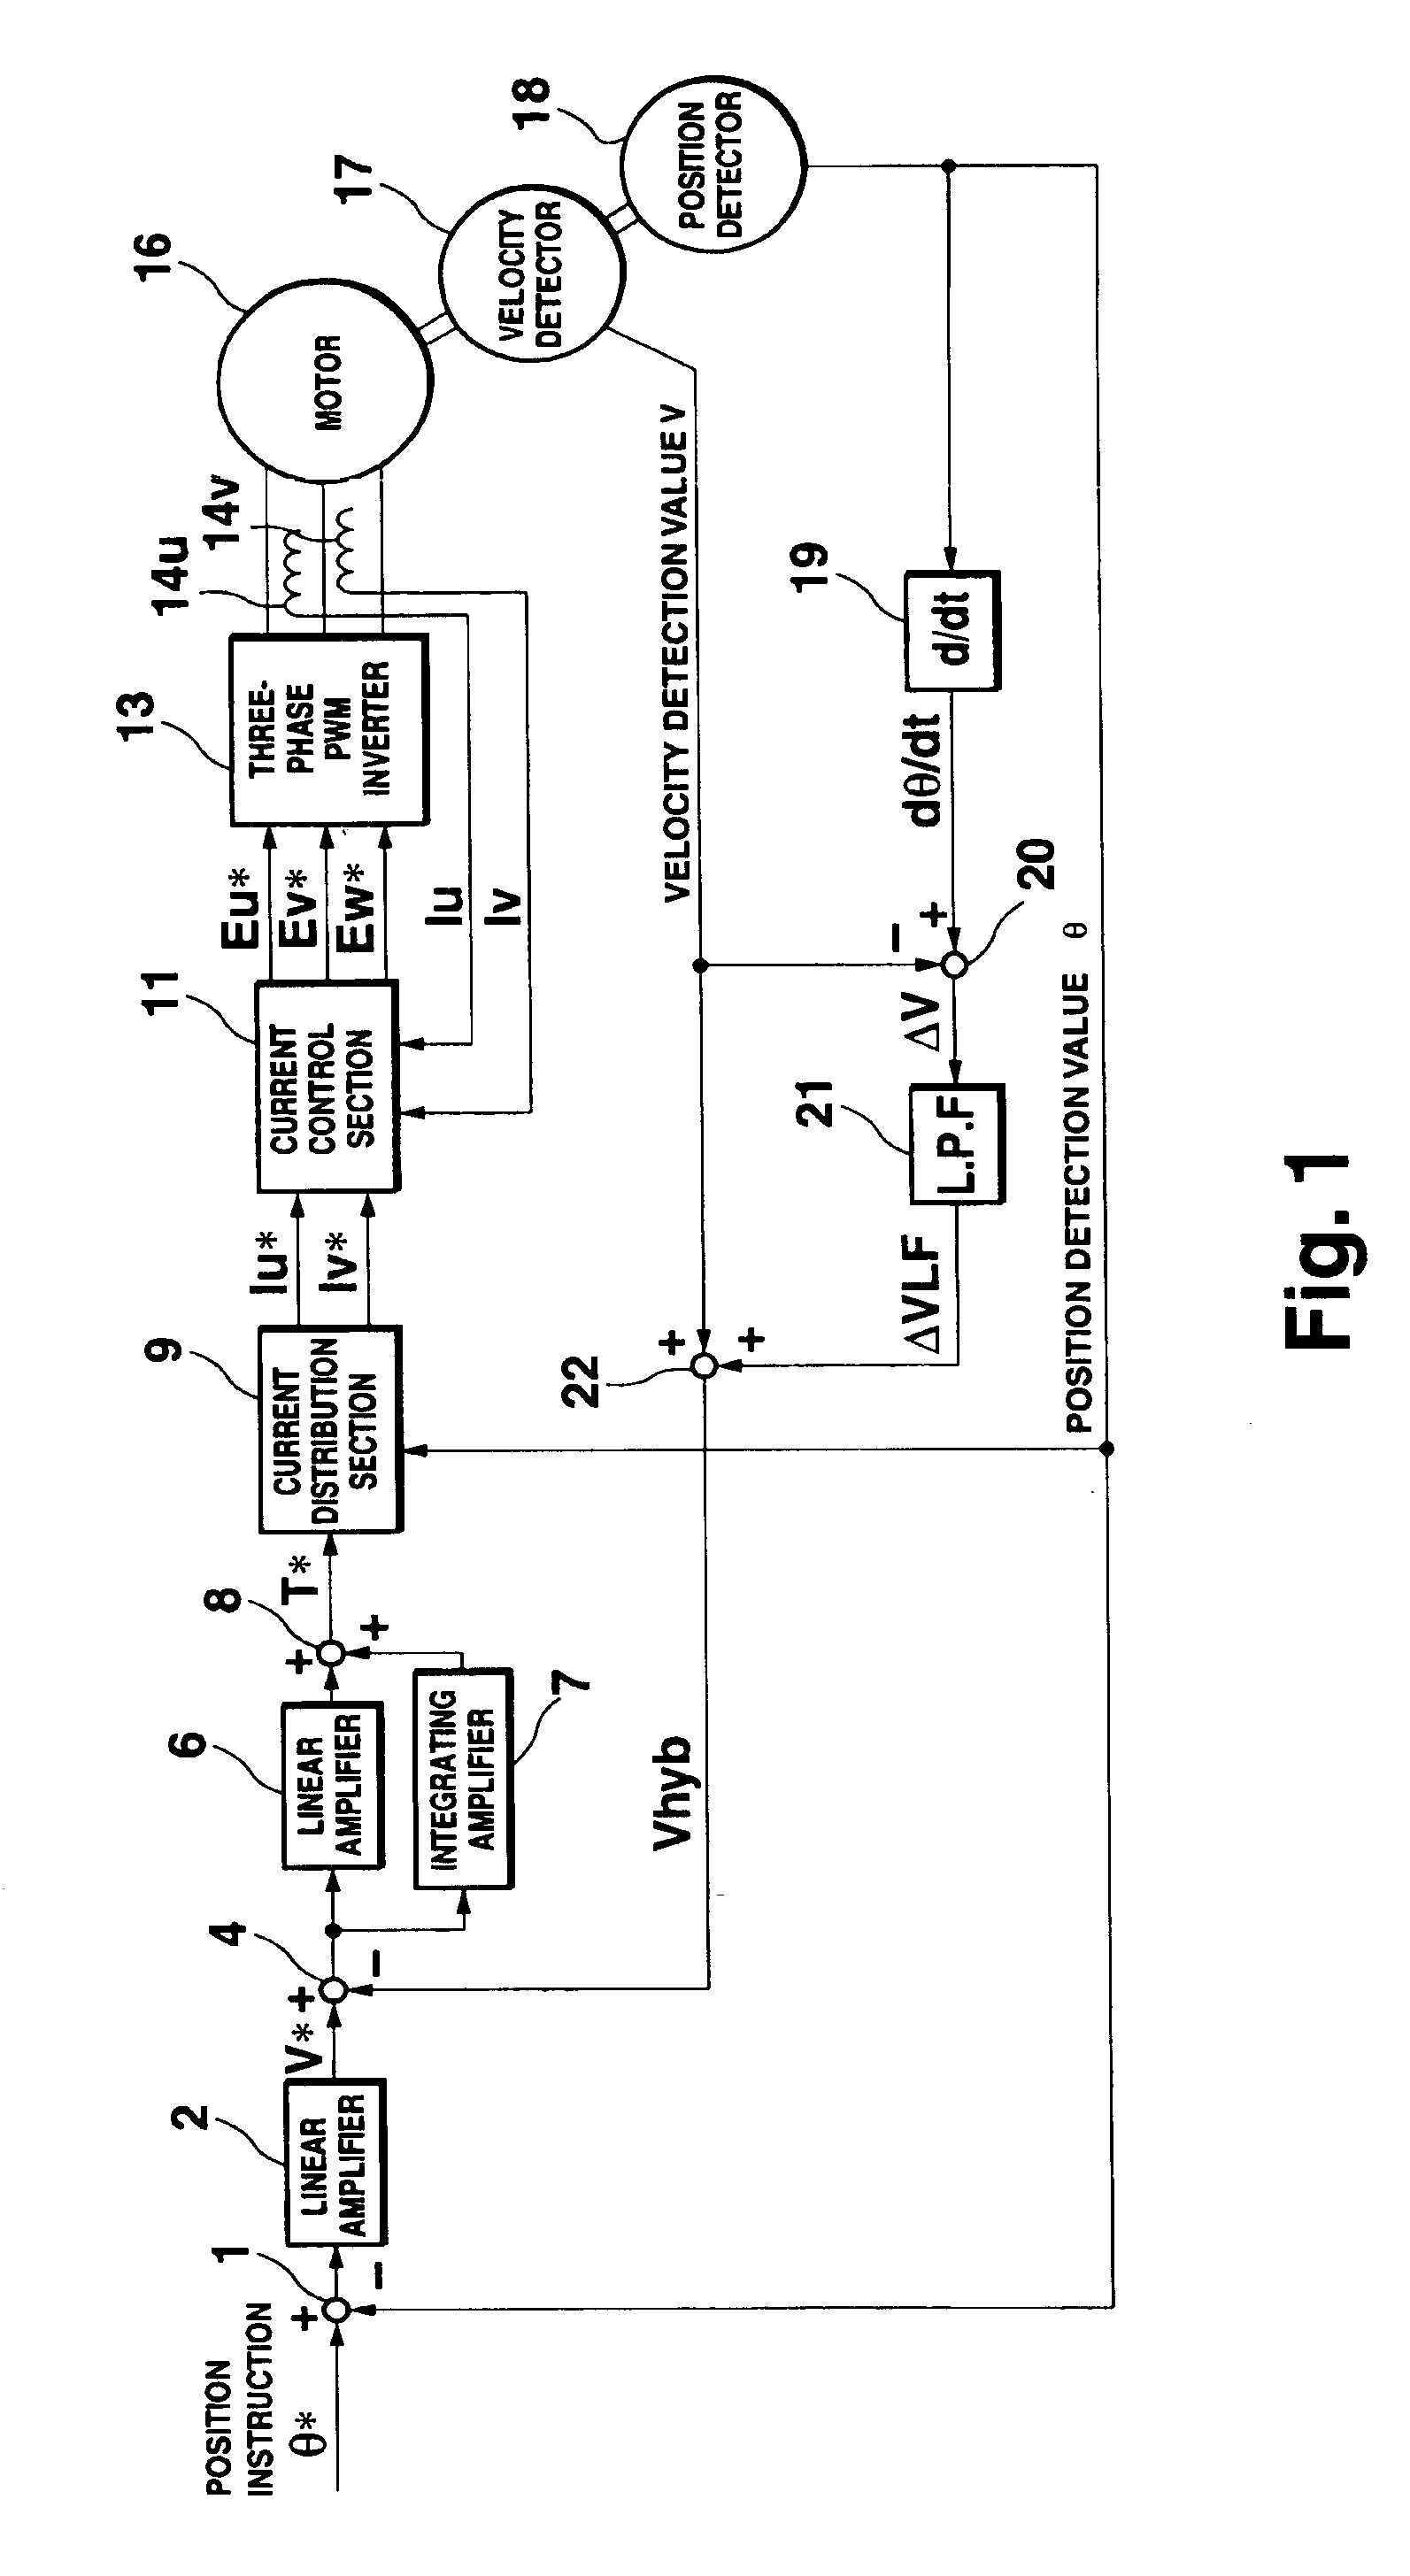 Motor control apparatus for controlling operation of mover of motor